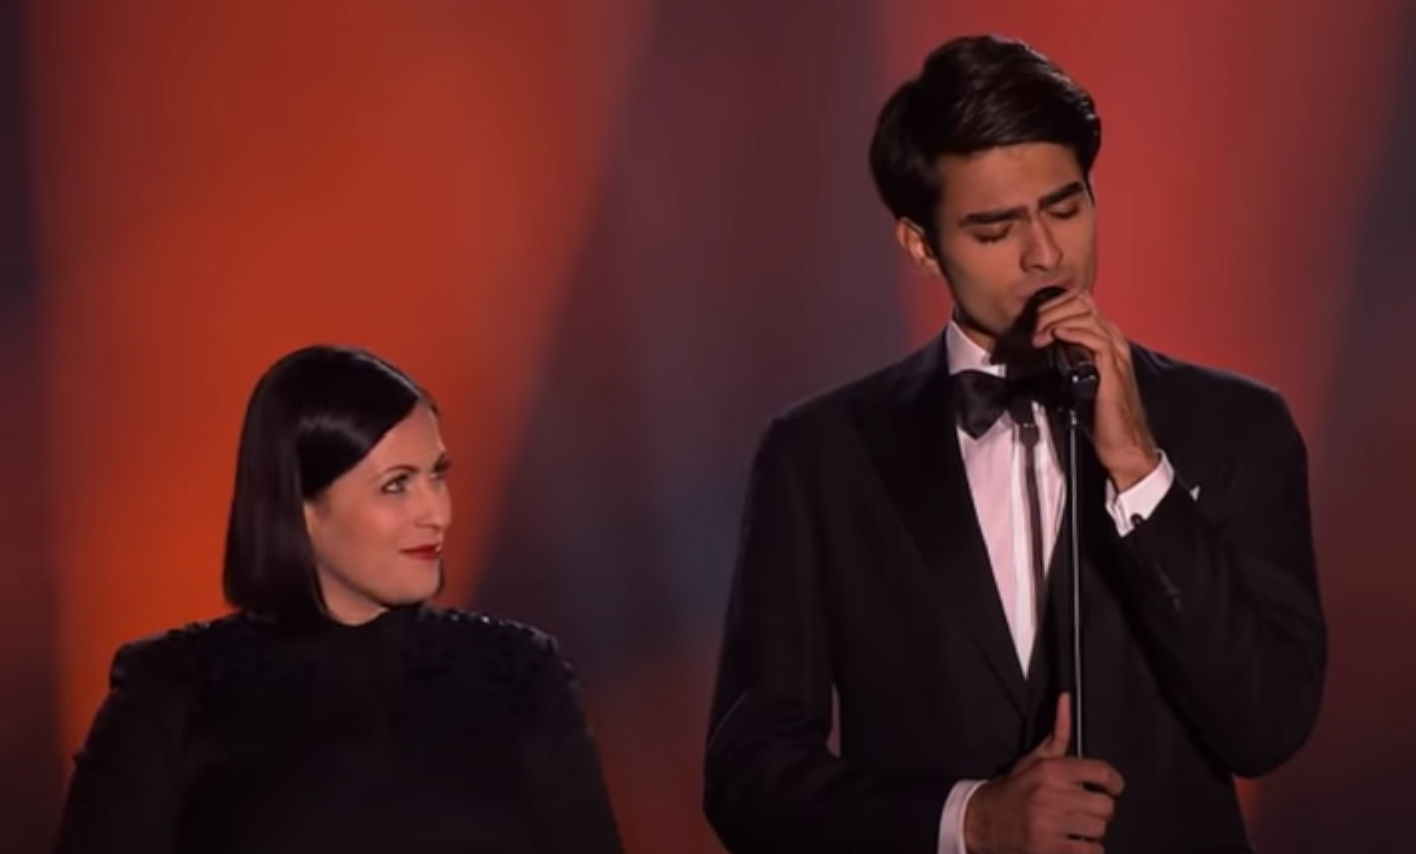 Son Of Andrea Bocelli, Matteo Bocelli, Following In Father's Footsteps With Haunting Elvis Cover